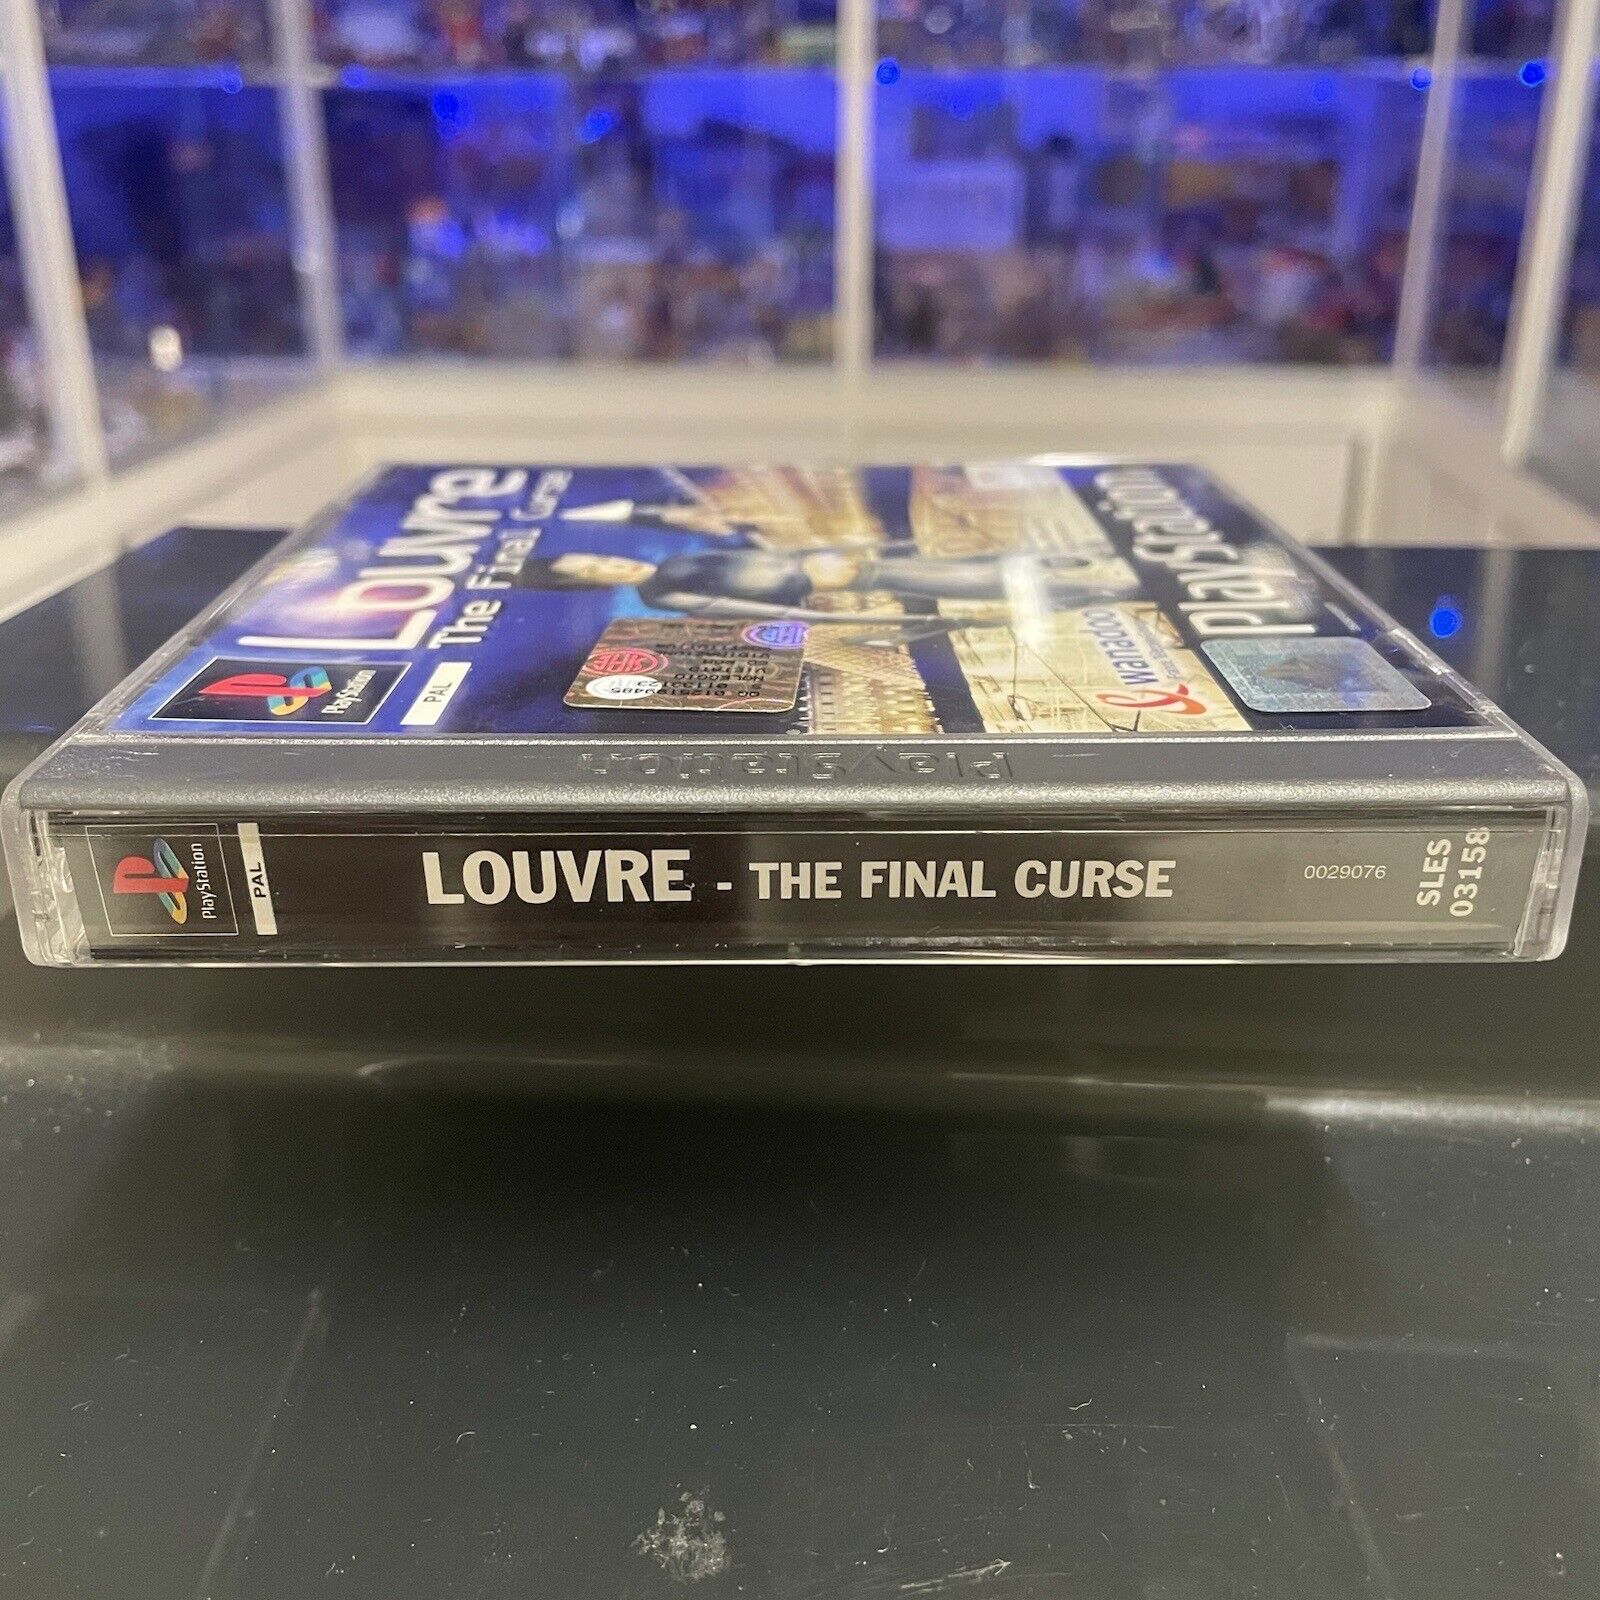 Ps1-Louvre-the-final-curse-Sony-Playstation-Pal-145340928880-3